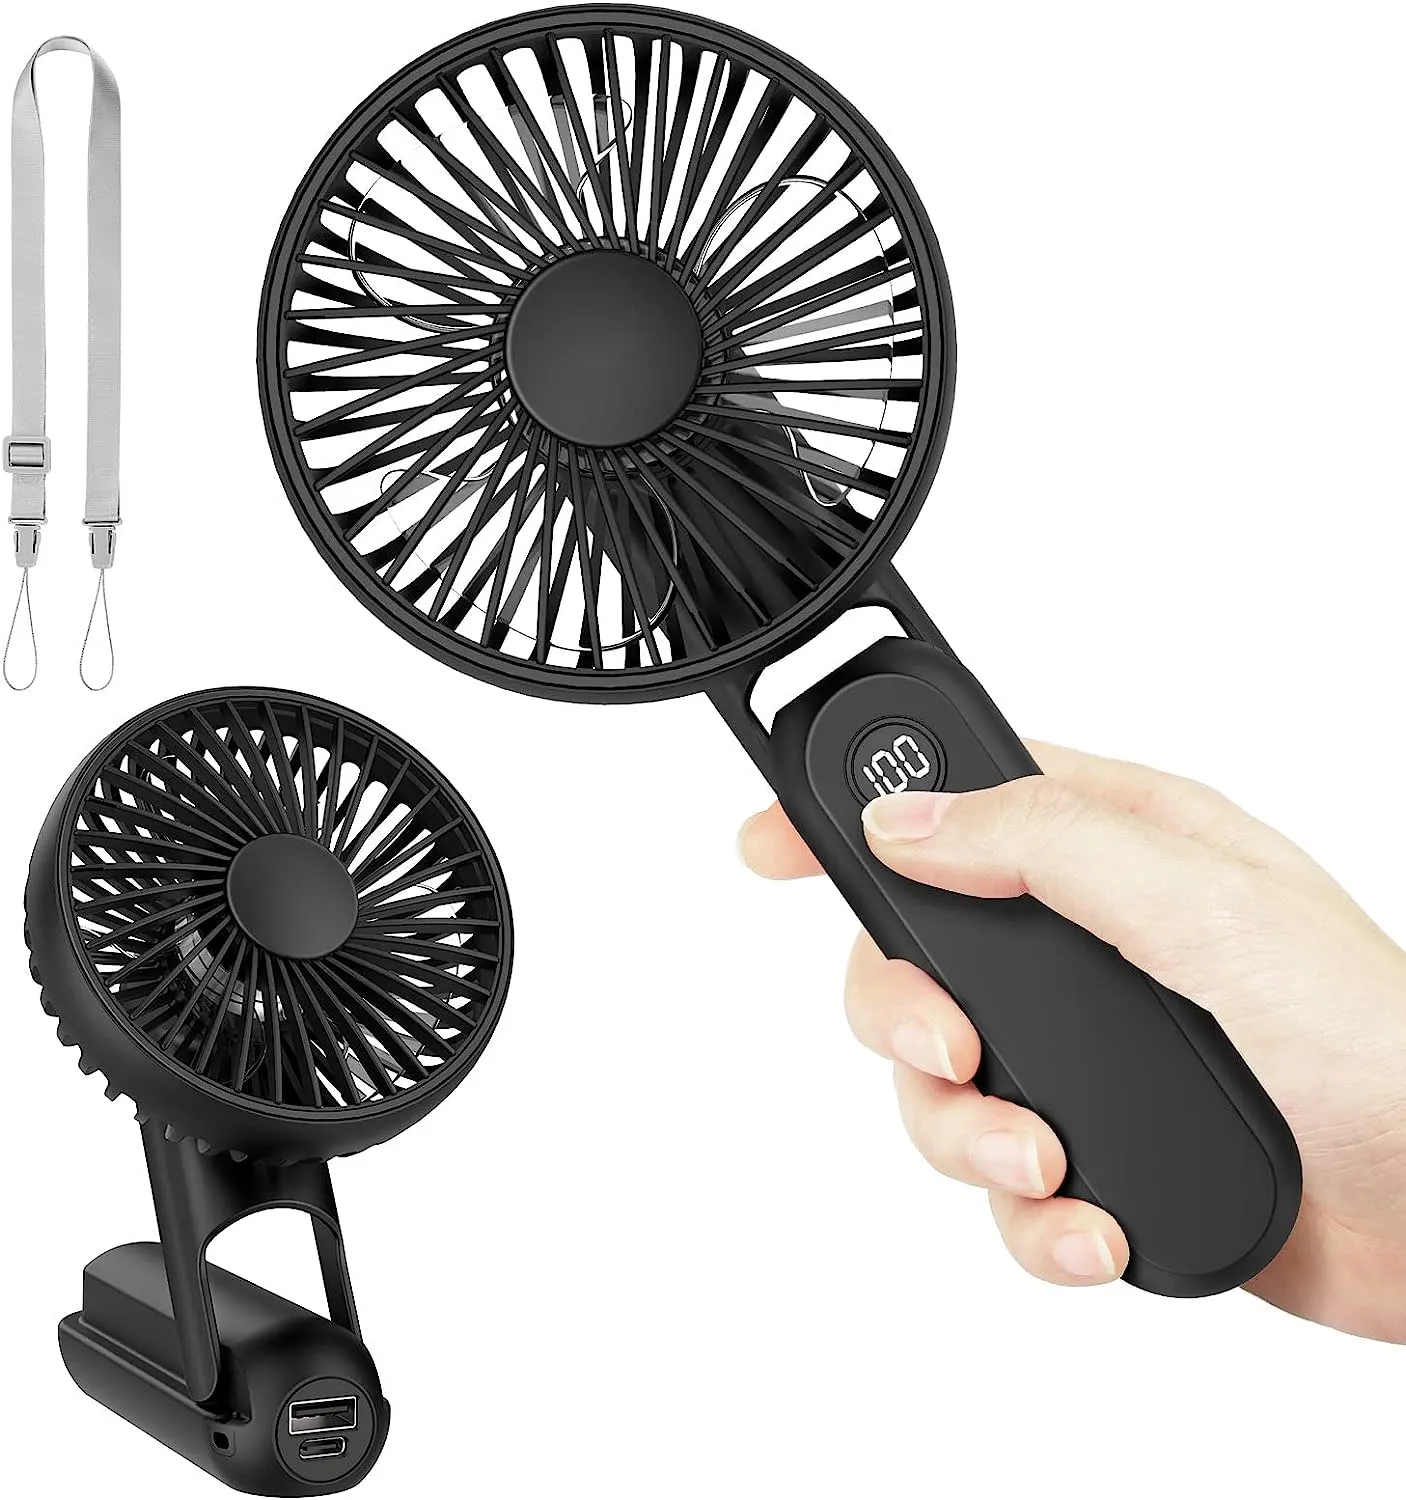 2022 New Foldable Hand-held Fan Small Hand Held Fan Rechargeable Folding Mini Hand fan with Power Bank for Travel Outdoors indoo